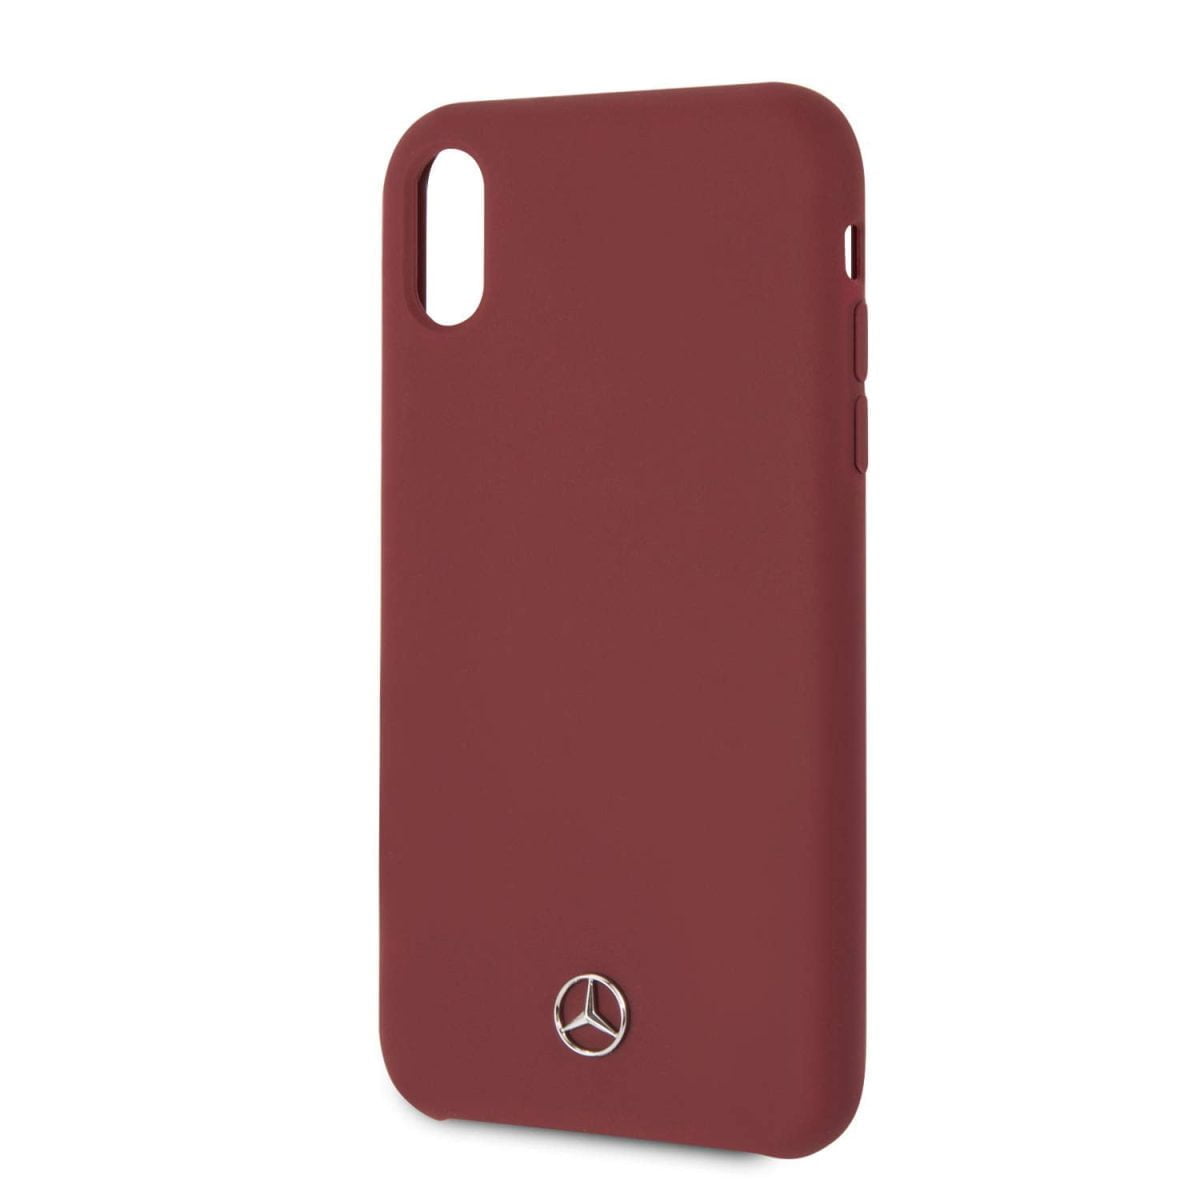 Mercedes Benz Iphone Xr Liquid Silicone Case With Microfiber Lining Red Drop Protection Easily Accessible Ports Officially Licensed 03 &Lt;H1&Gt;Iphone Xs Liquid Silicone Case With Microfiber Lining Red (Mercedes-Benz)&Lt;/H1&Gt; &Lt;Span Class=&Quot;Y2Iqfc&Quot; Lang=&Quot;En&Quot;&Gt;Mercedes-Benz Pattern Ii Series. The Minimalist And Captivating Aesthetics Of Mercedes-Benz Interior Design Have Been Transferred Silicon. They Guarantee A Unique Look And Safety For Your Phone. - Silicon Case With A Metallic Mercedes-Benz Logo Has A 3D Effect - The Unique Finish Enhances The Look And Quality Of This Case - Designed With Easy Access To Ports And Buttons - Case Compatible With Wireless Chargers Collection: Pattern Line Twister Type: Hardcase Material:silicon Red  Compatibility: Iphone X / Xs Product Manufactured Under License From Mercedes-Benz.&Lt;/Span&Gt; Iphone Silicon Cases Iphone Xs Liquid Silicone Case With Microfiber Lining Red (Mercedes-Benz)